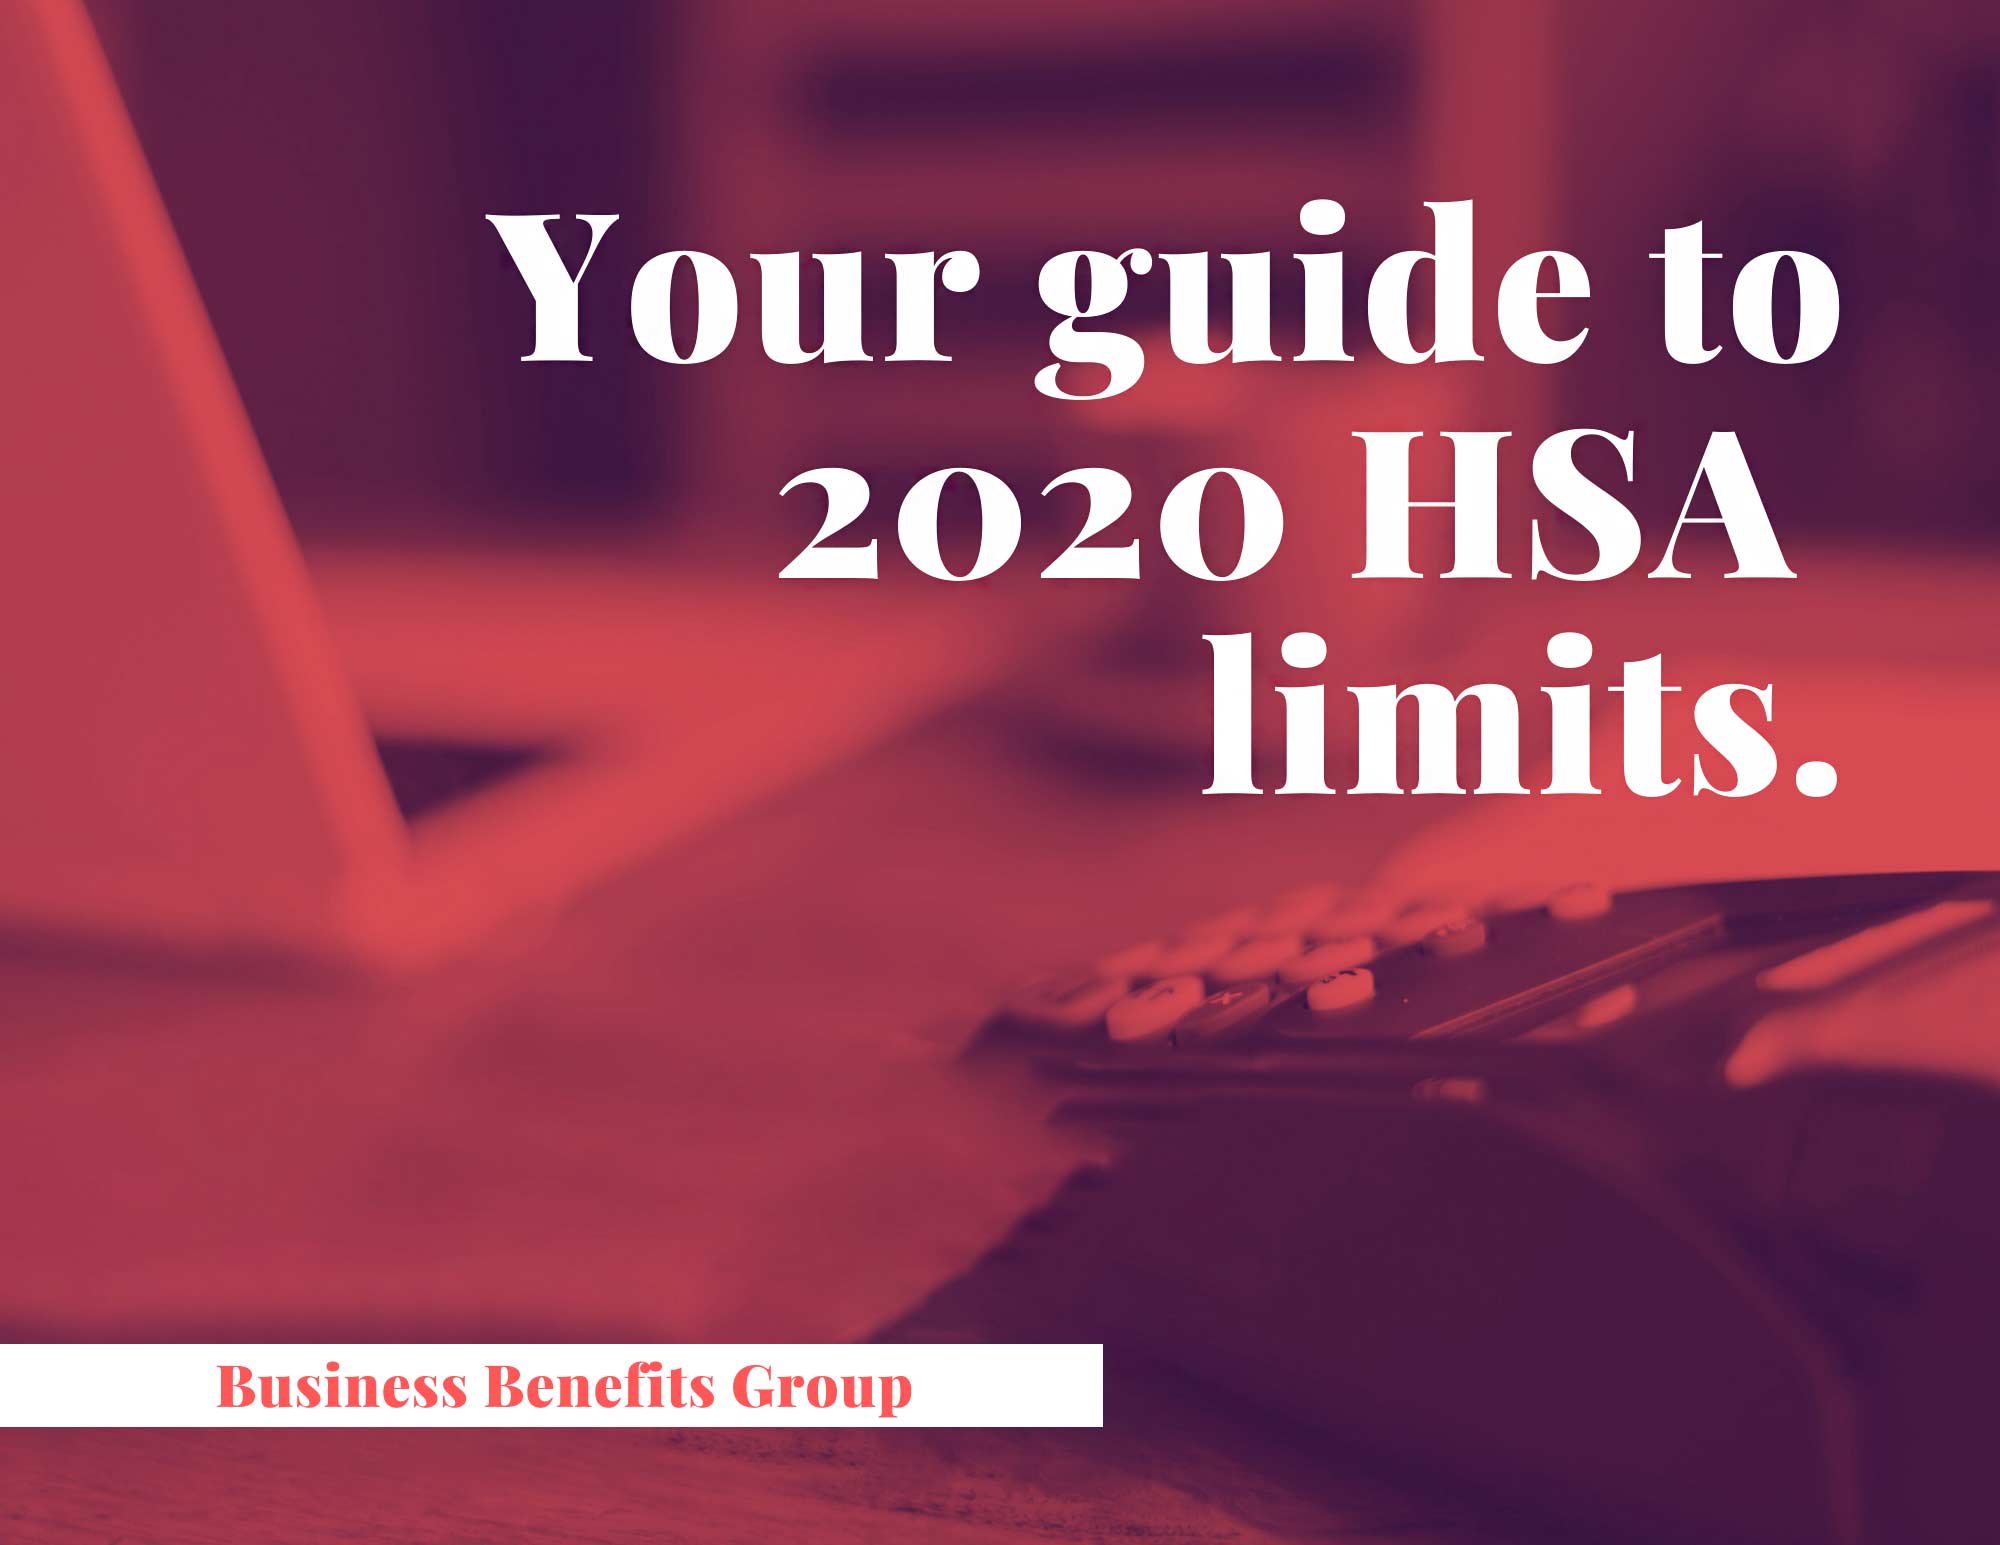 Your guide to 2020 HSA limits